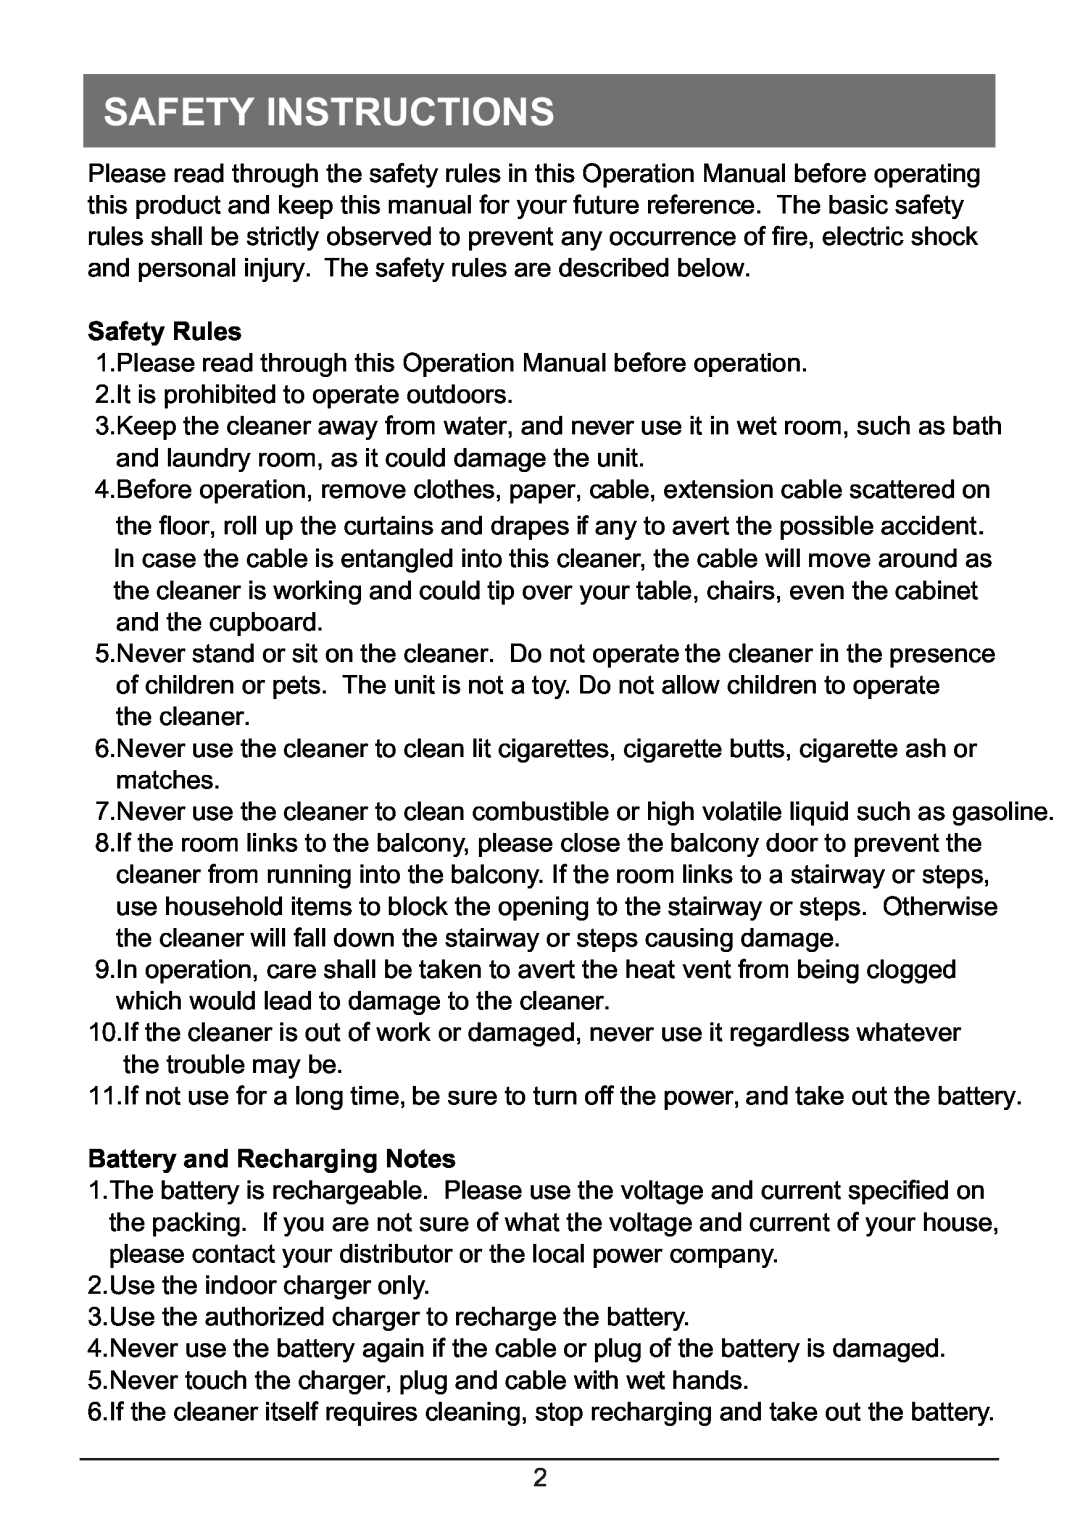 P3 International P4920 operation manual Safety Instructions, Safety Rules, Battery and Recharging Notes 